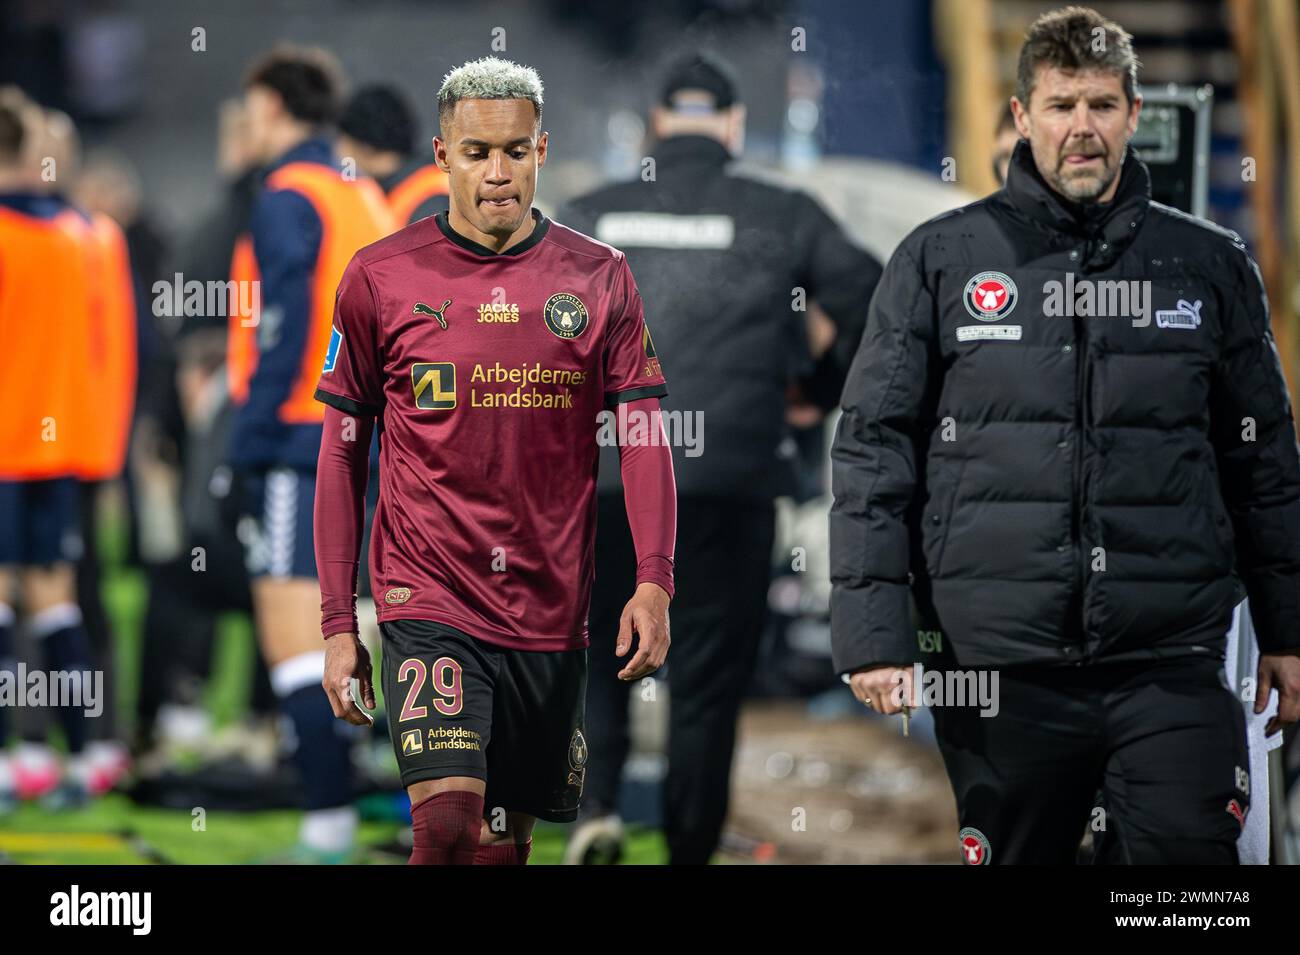 Aarhus, Denmark. 25th, February 2024. Paulinho (29) of FC Midtjylland leaves the pitch after a second yellow card and thereby red during the 3F Superliga match between Aarhus GF and FC Midtjylland at Ceres Park in Aarhus. (Photo credit: Gonzales Photo - Morten Kjaer). Stock Photo